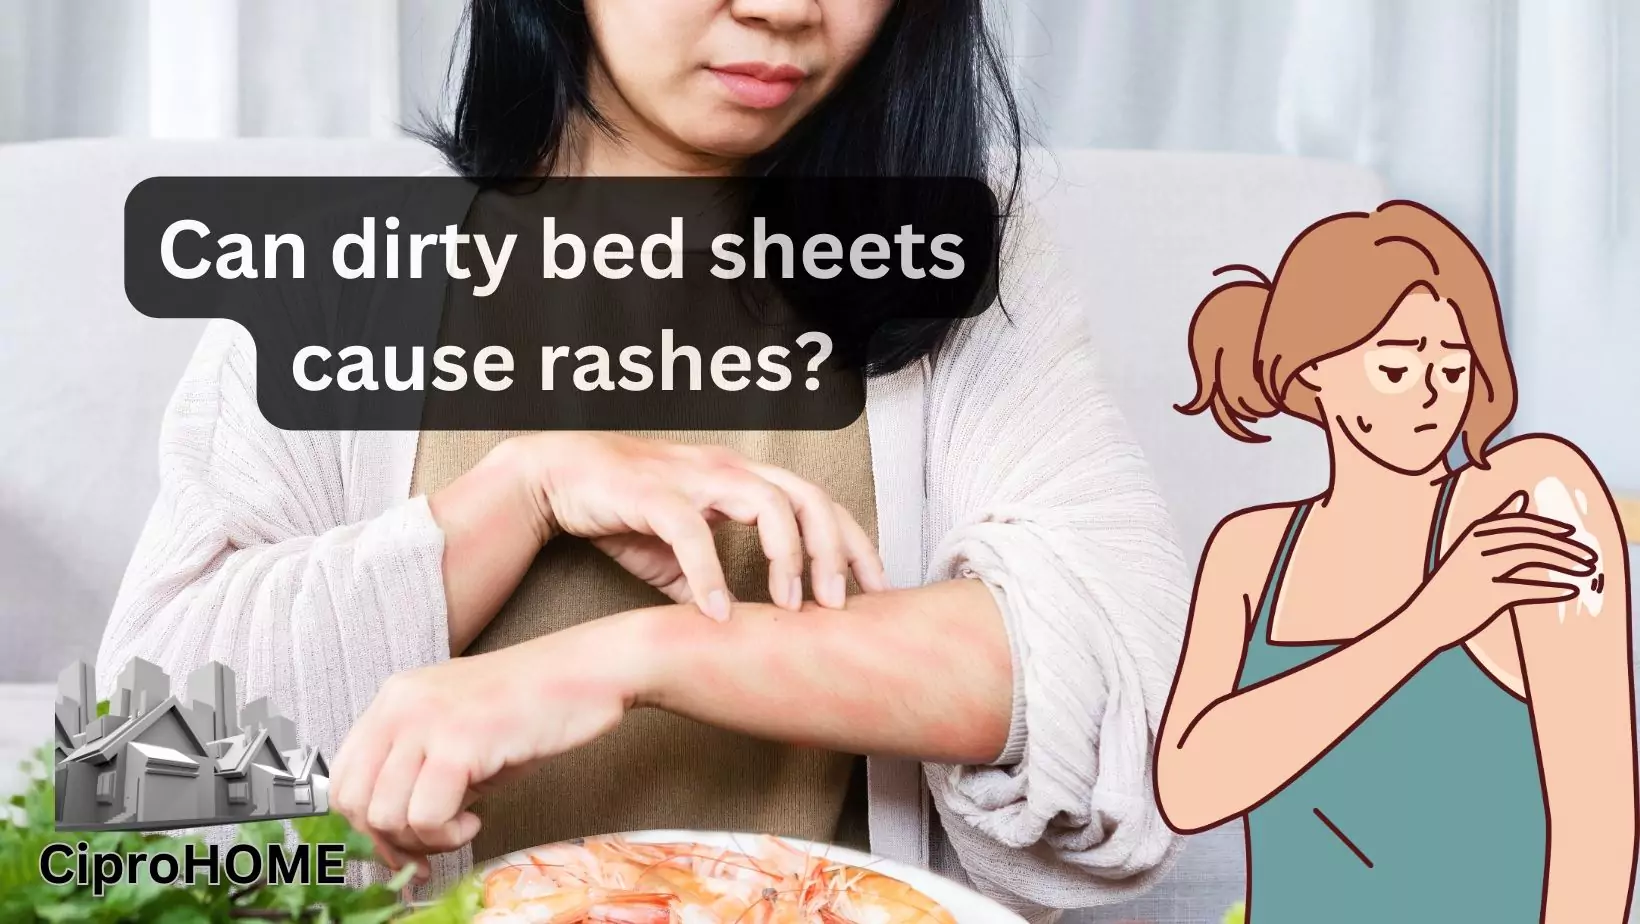 Can Dirty Bed Sheets Cause Rashes 65063a72bbf2d.webp